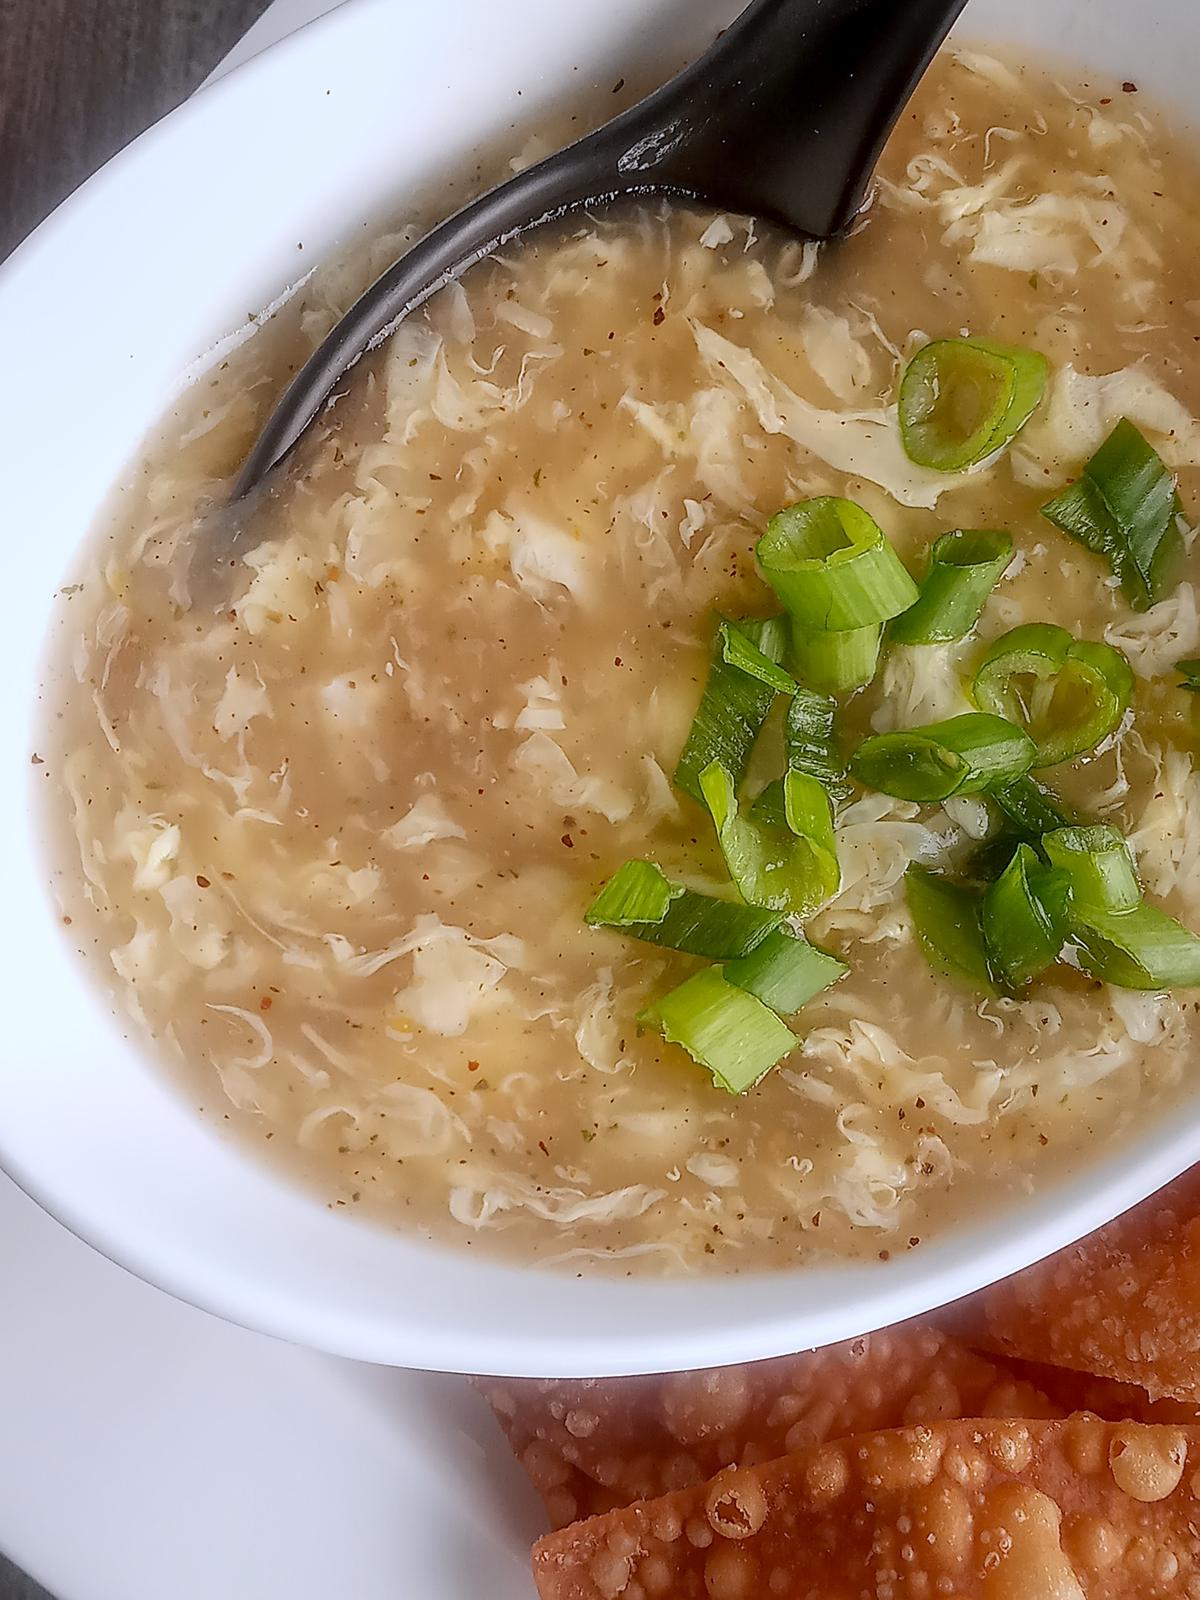 Egg drop soup with scallions garnish.